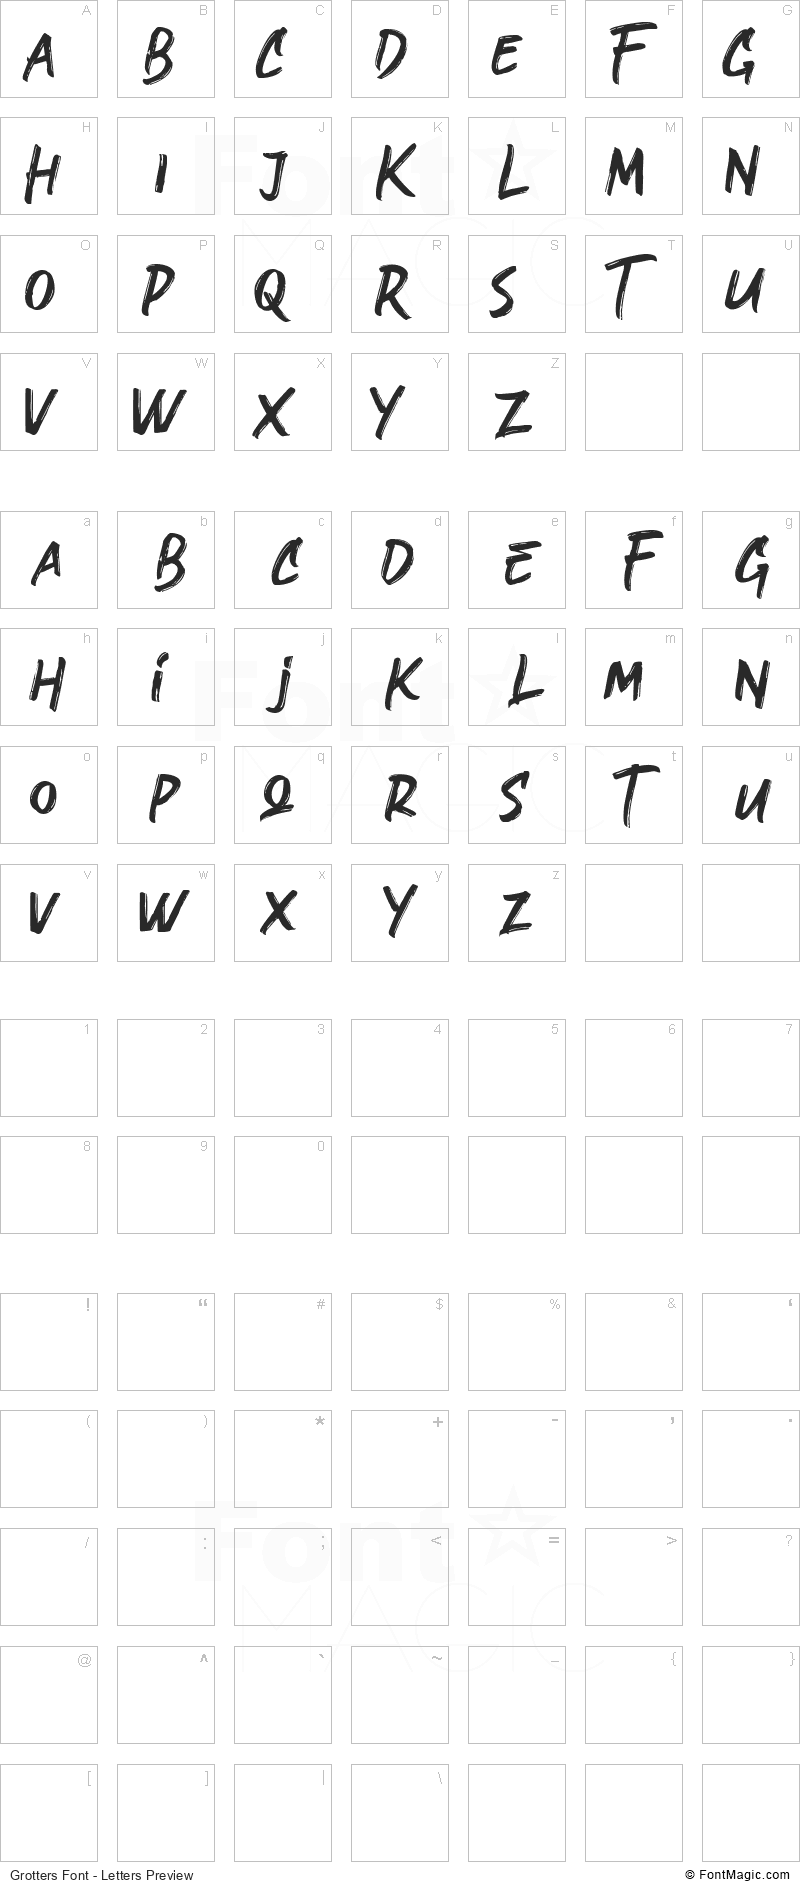 Grotters Font - All Latters Preview Chart